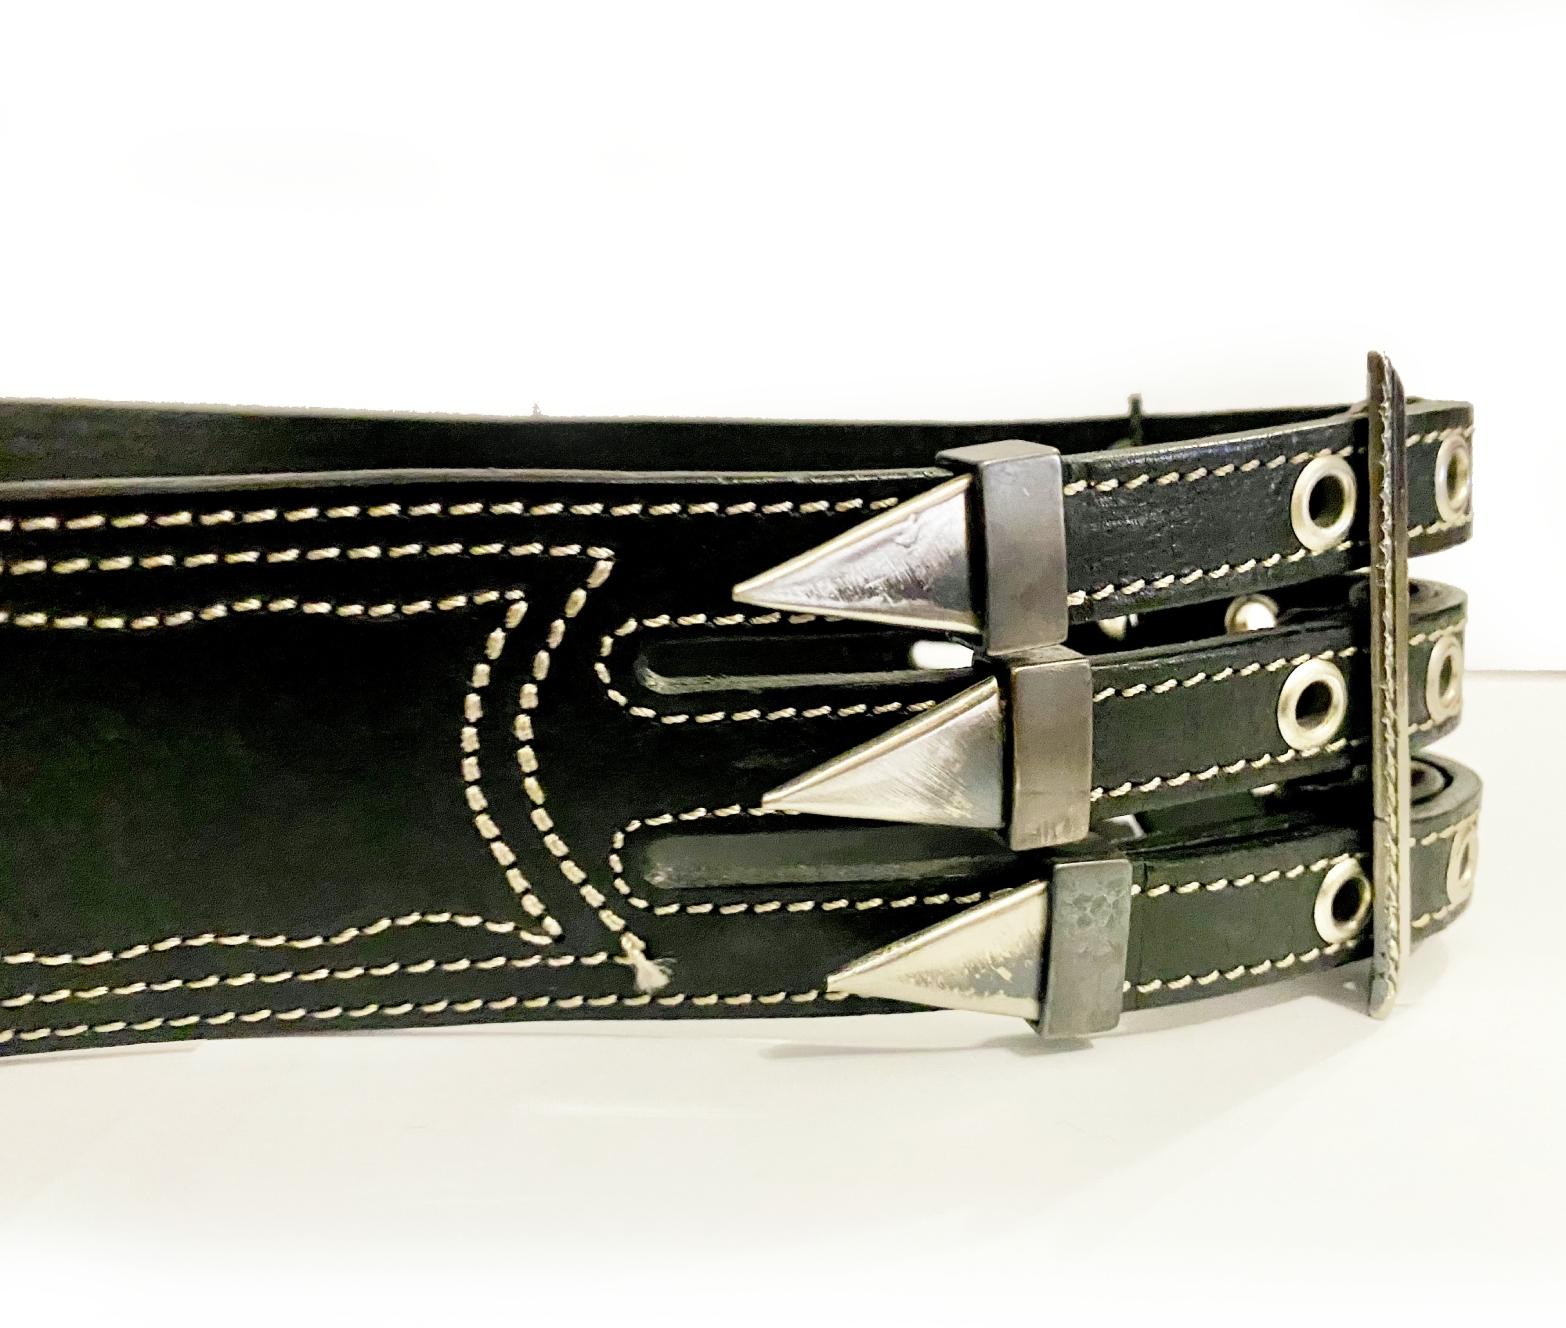 Discover enduring sophistication with the opulent 1990s Gianfranco Ferre Black Leather Metal Spike Belt. Enveloped in a lustrous double lace design, embellished with shimmering silver metal spikes, this belt exudes exclusivity and